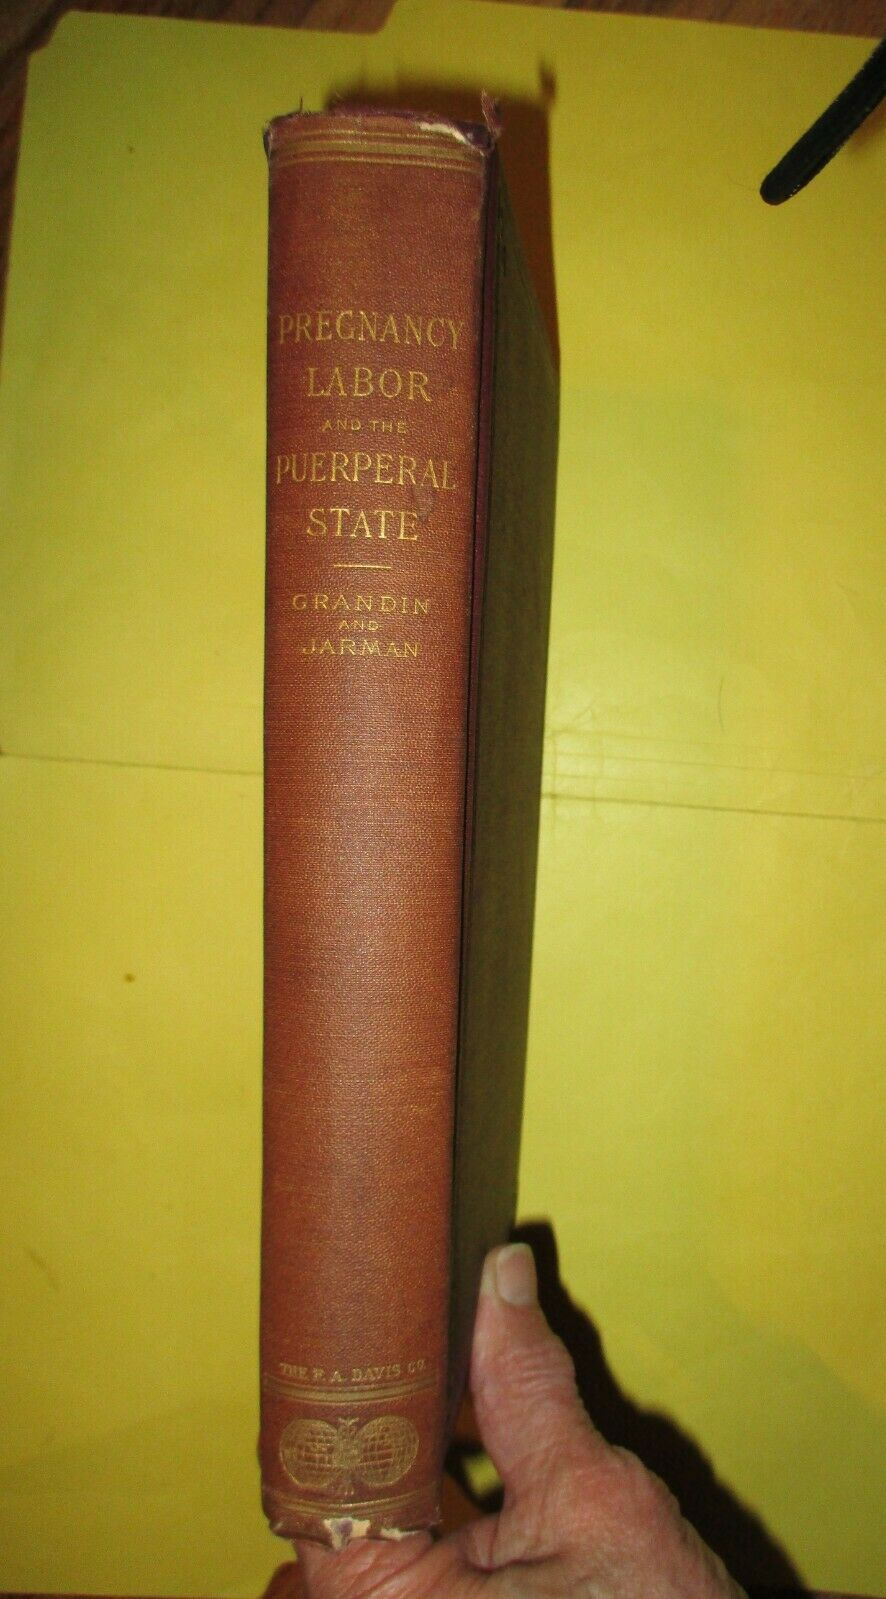 Antique Book- Pregnancy, Labor, and the Puerperal State by Grandin &Jarman 1895